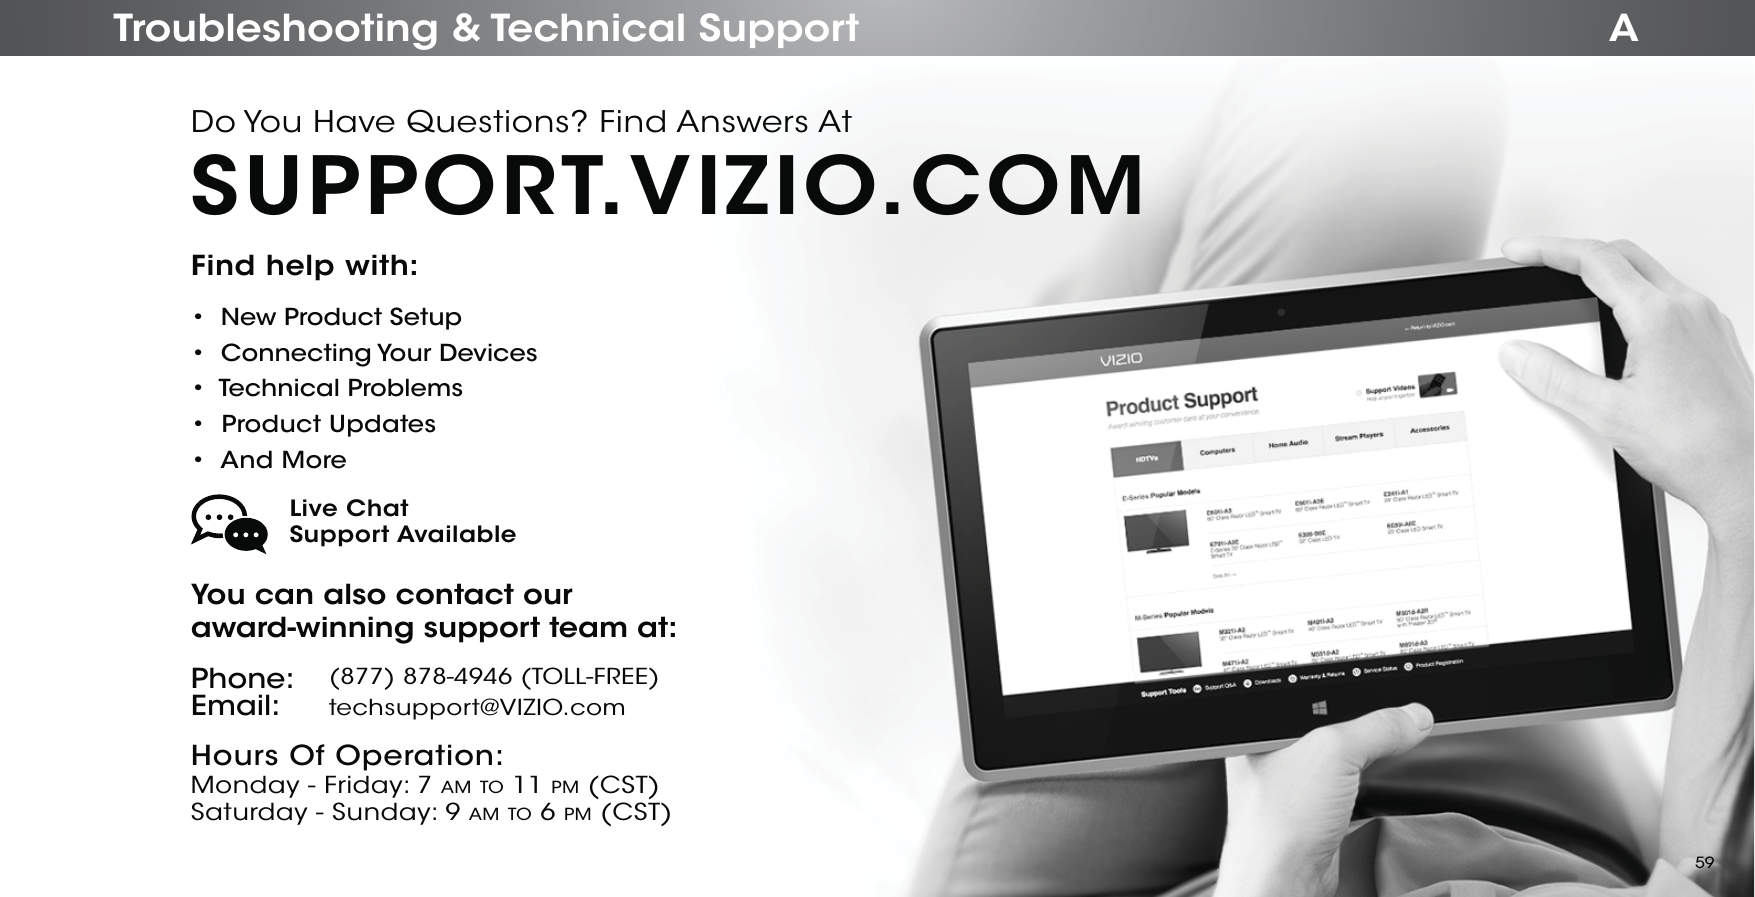 ATroubleshooting &amp; Technical SupportFind help with:•  New Product Setup•  Connecting Your Devices•  Technical Problems•  Product Updates•  And MoreYou can also contact our  award-winning support team at:Phone:Email:(877) 878-4946 (TOLL-FREE)techsupport@VIZIO.comHours Of Operation:   Monday - Friday: 7 AM TO 11 PM (CST) Saturday - Sunday: 9 AM TO 6 PM (CST)Live Chat  Support AvailableDo You Have Questions? Find Answers AtSUPPORT.VIZIO.COM59